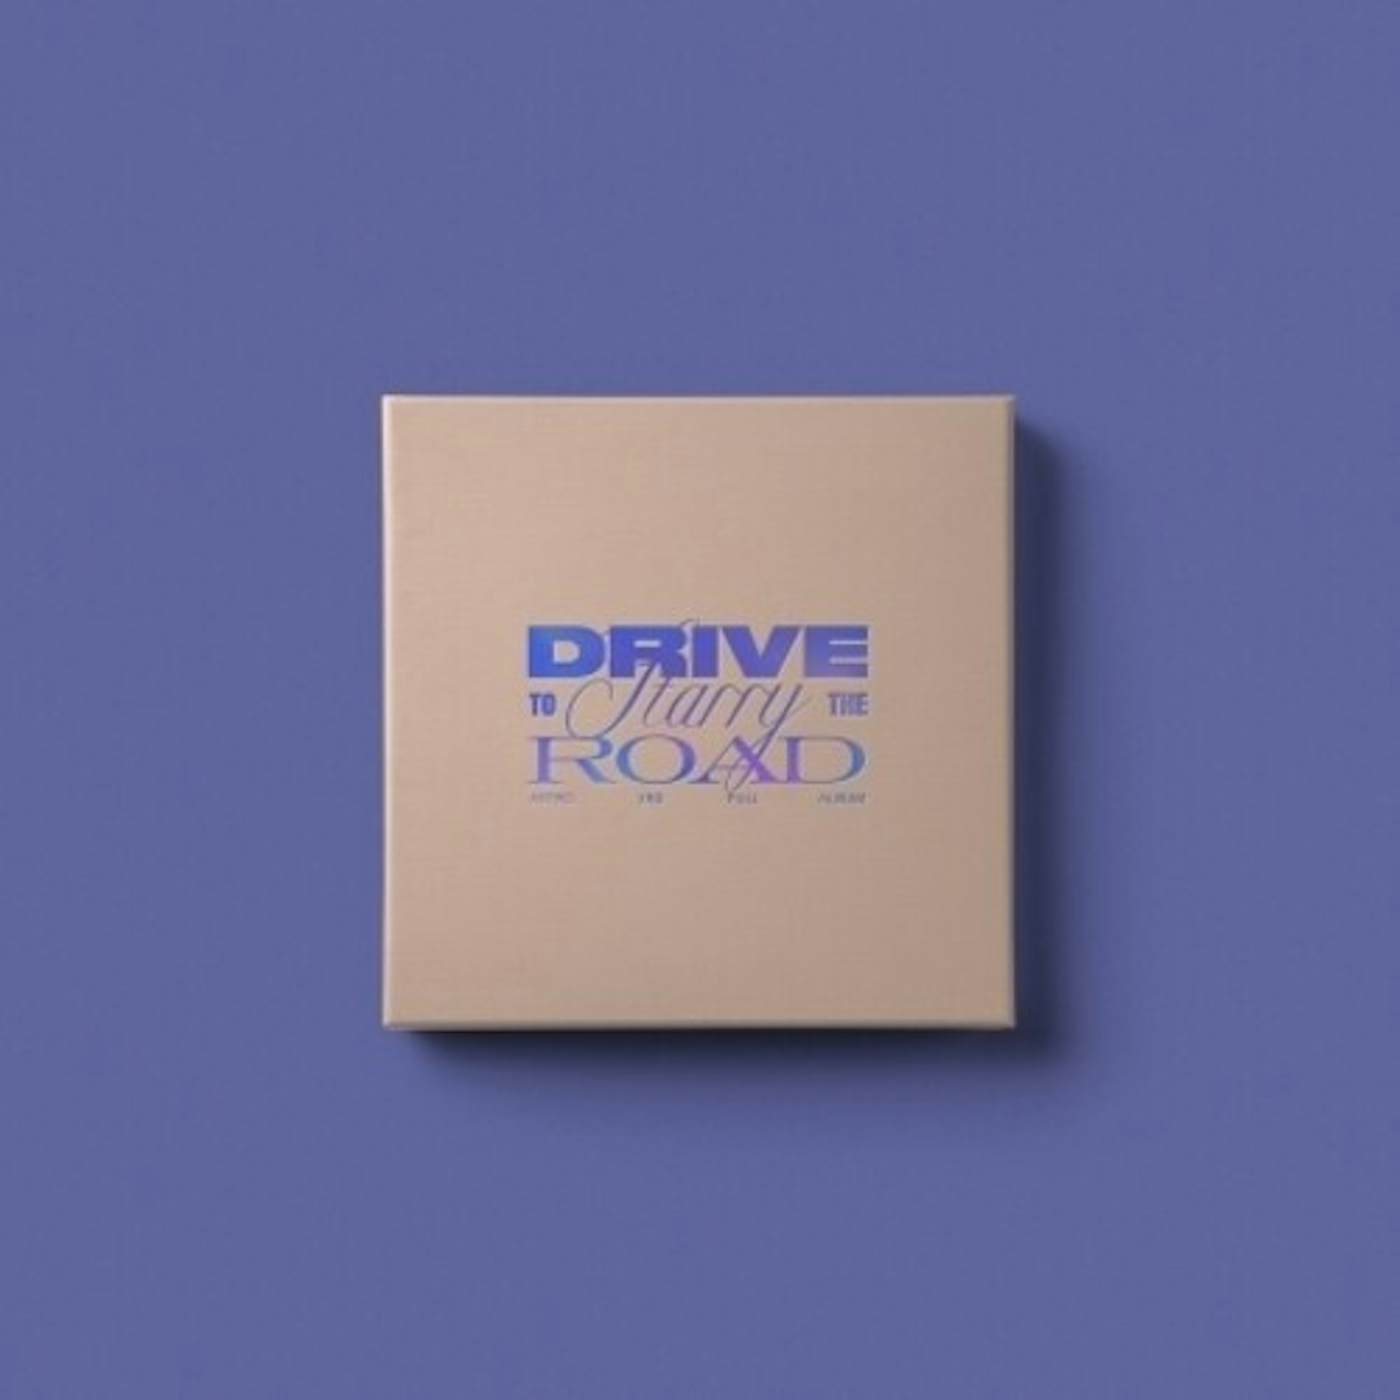 ASTRO DRIVE TO THE STARRY ROAD (ROAD VERSION) CD